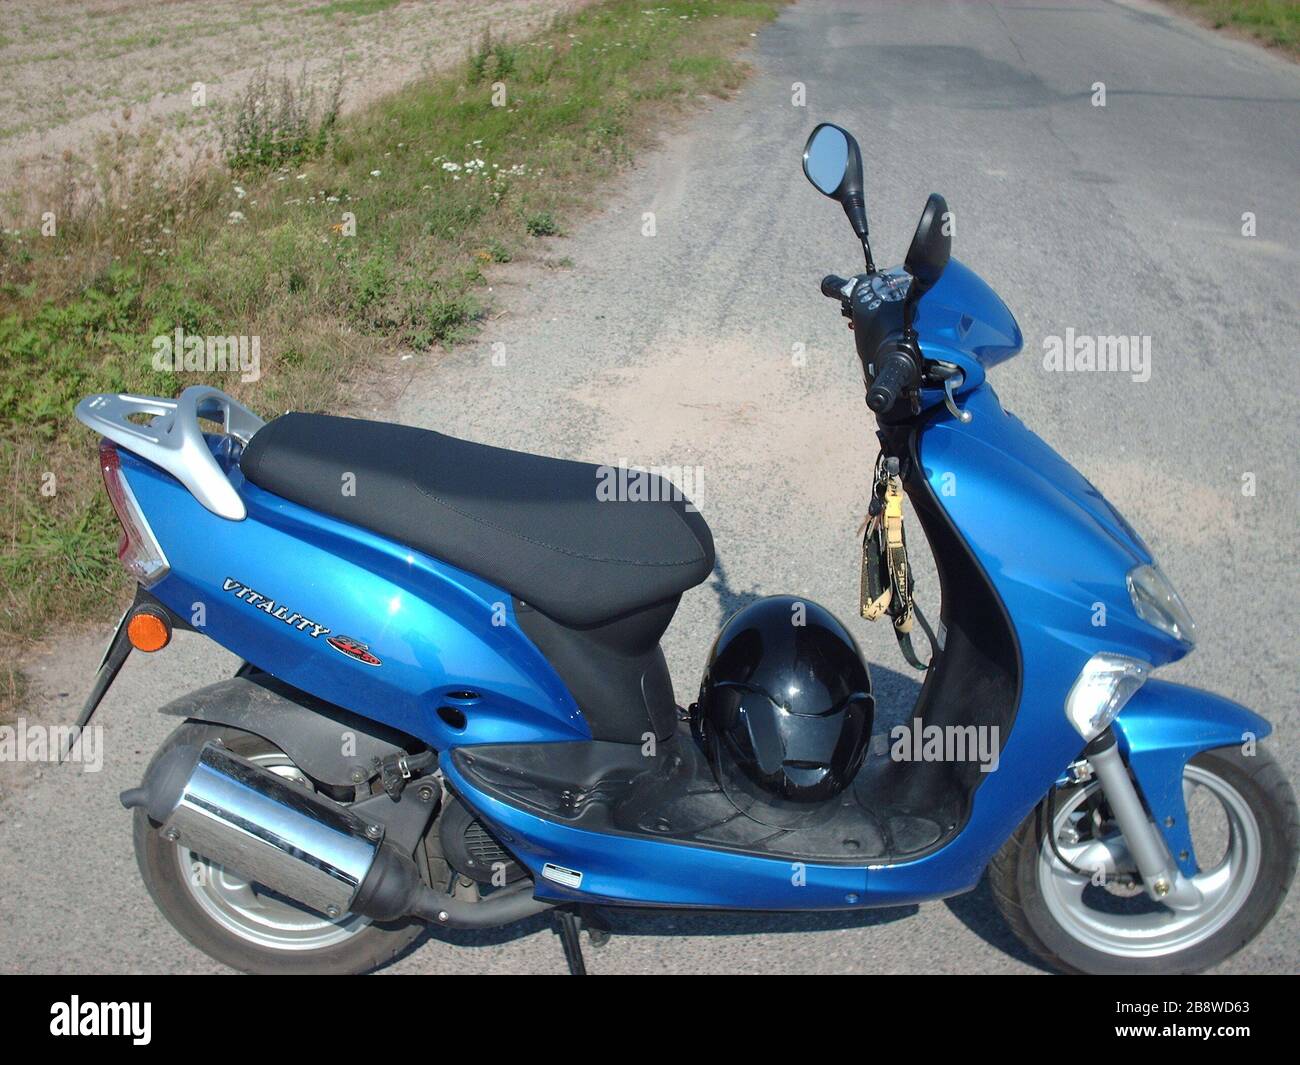 Polski: Scooter Kymco Vitality, 49 ccm.; 14 March 2009 (original upload  date); Transferred from pl.wikipedia; transferred to Commons by User:Masur  using CommonsHelper.; Original uploader was Verdemax at pl.wikipedia Stock  Photo - Alamy